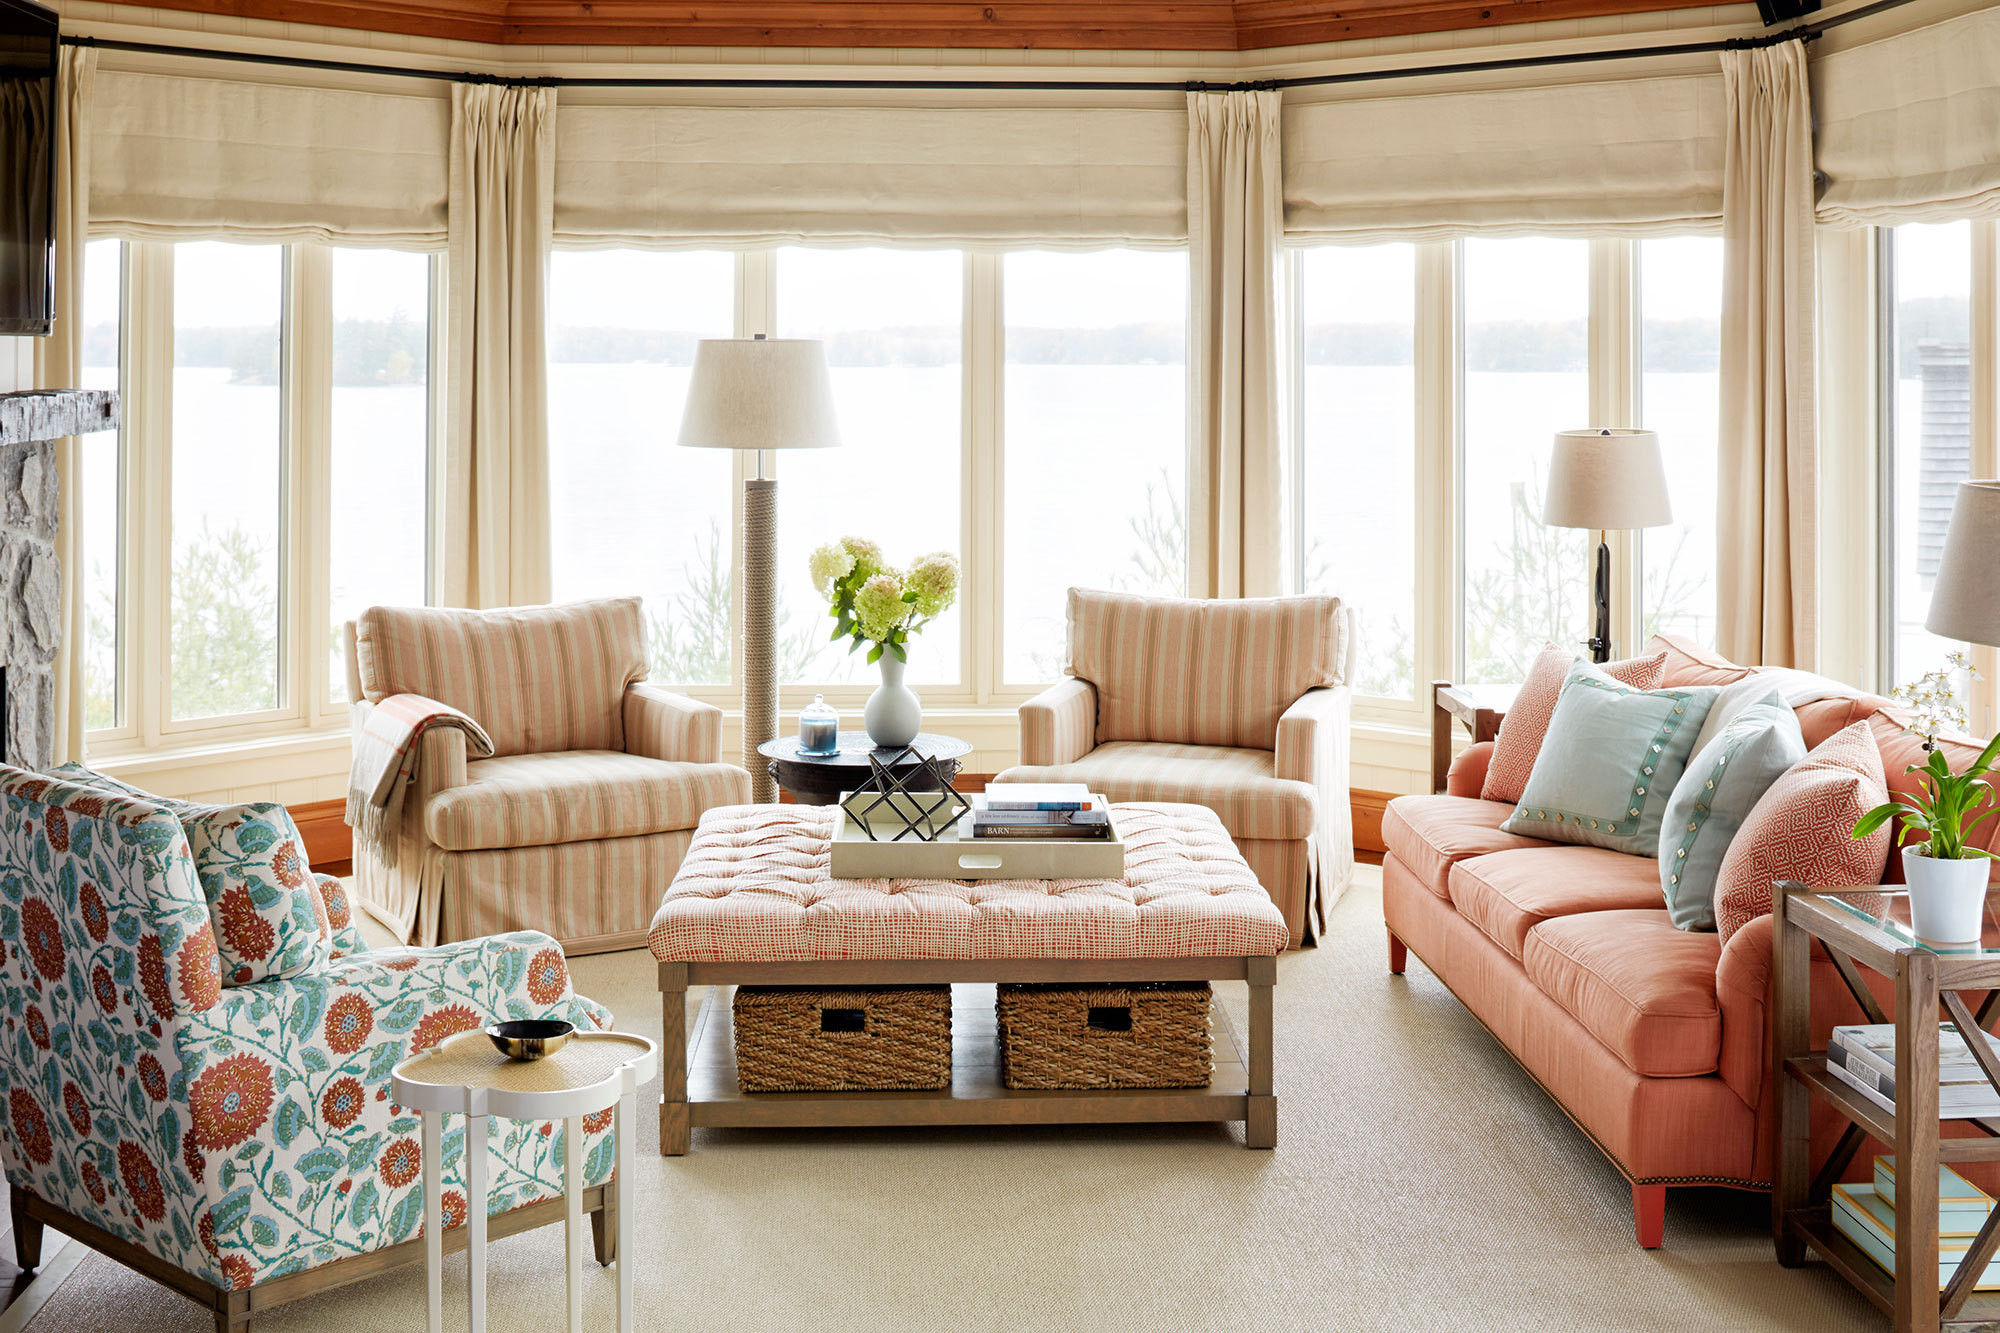 In The Family Room, Overlooking Lake Joseph, Upholstered - Living Room Overlooking Lake , HD Wallpaper & Backgrounds